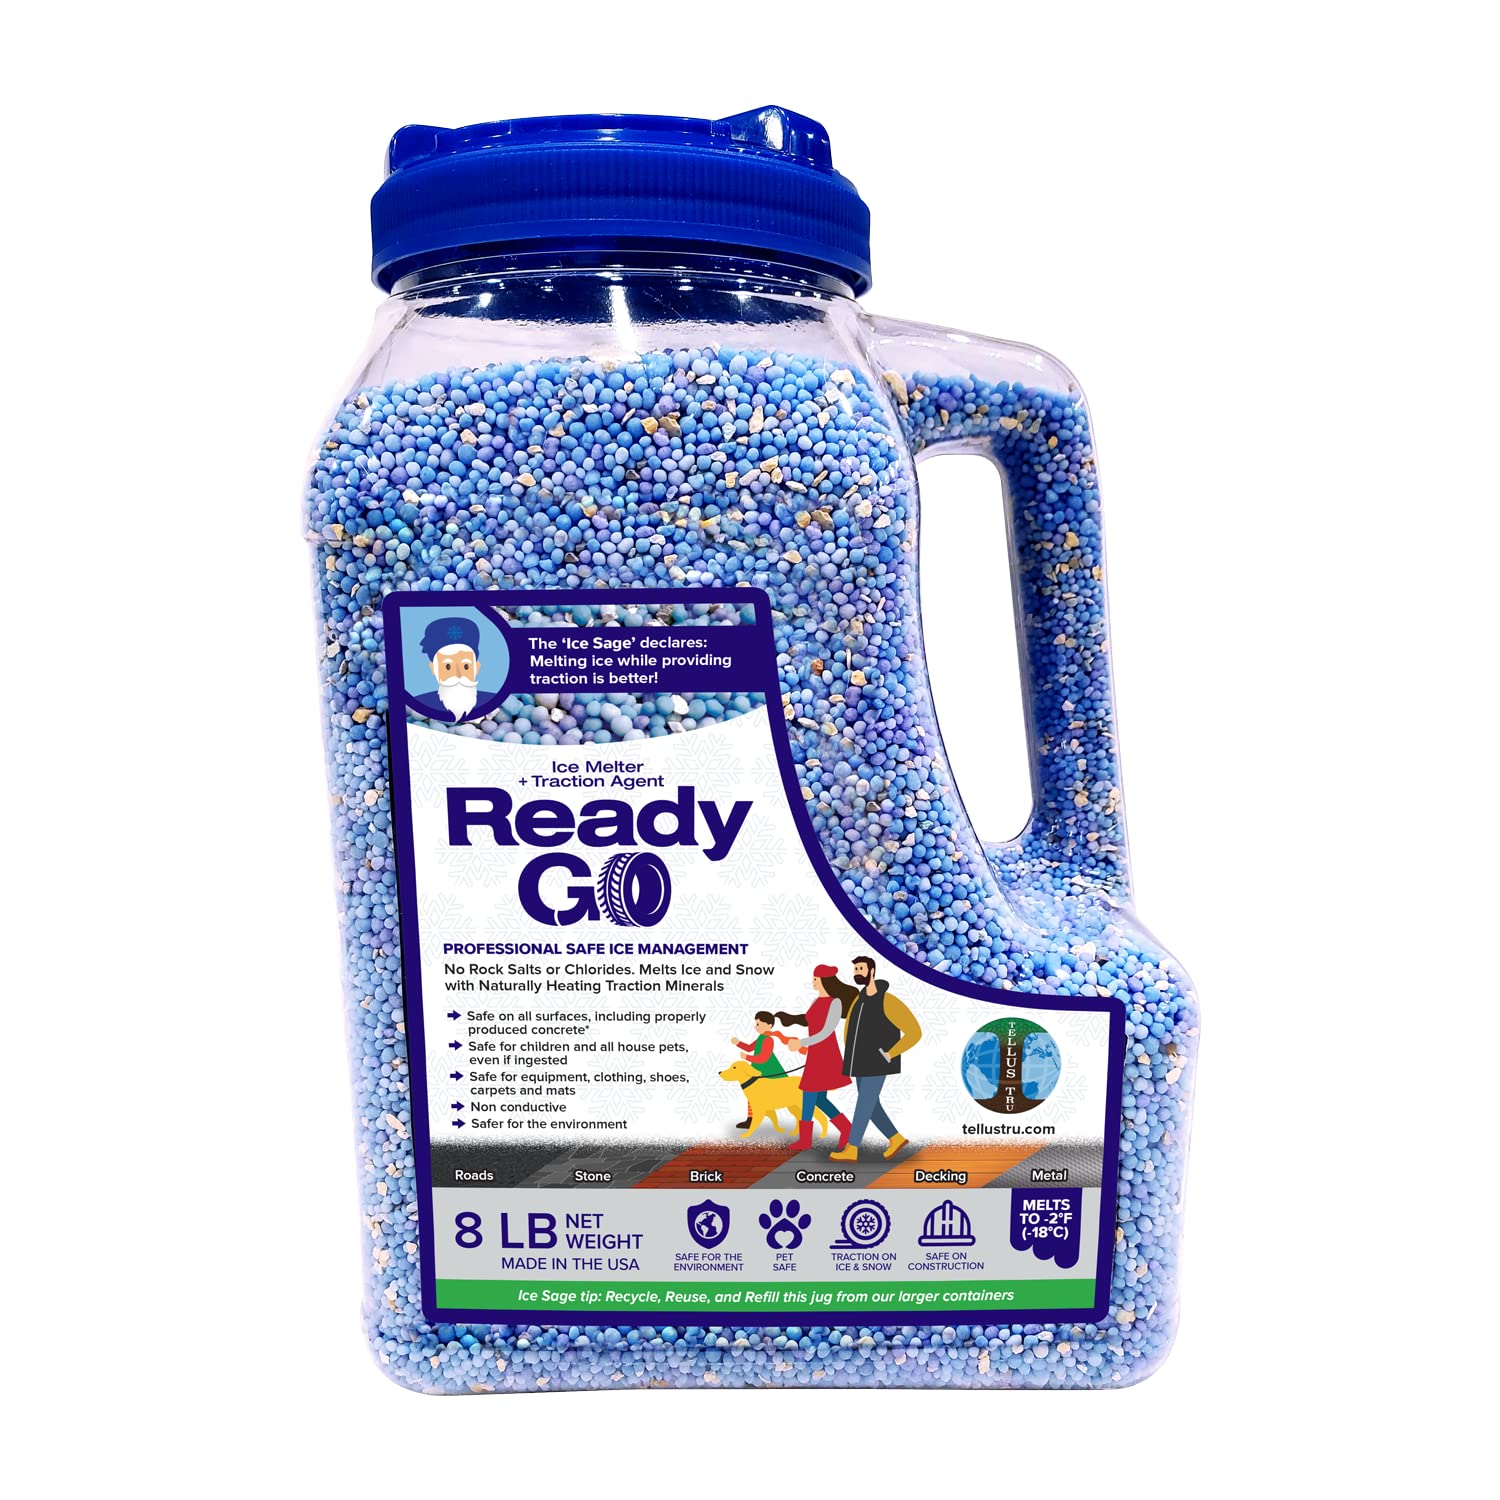 Ready Go Ice Melter With Traction Minerals To Melt Ice & Snow For Instant Traction Chloride Free Salt Free, Non-Toxic, Pet Safe,